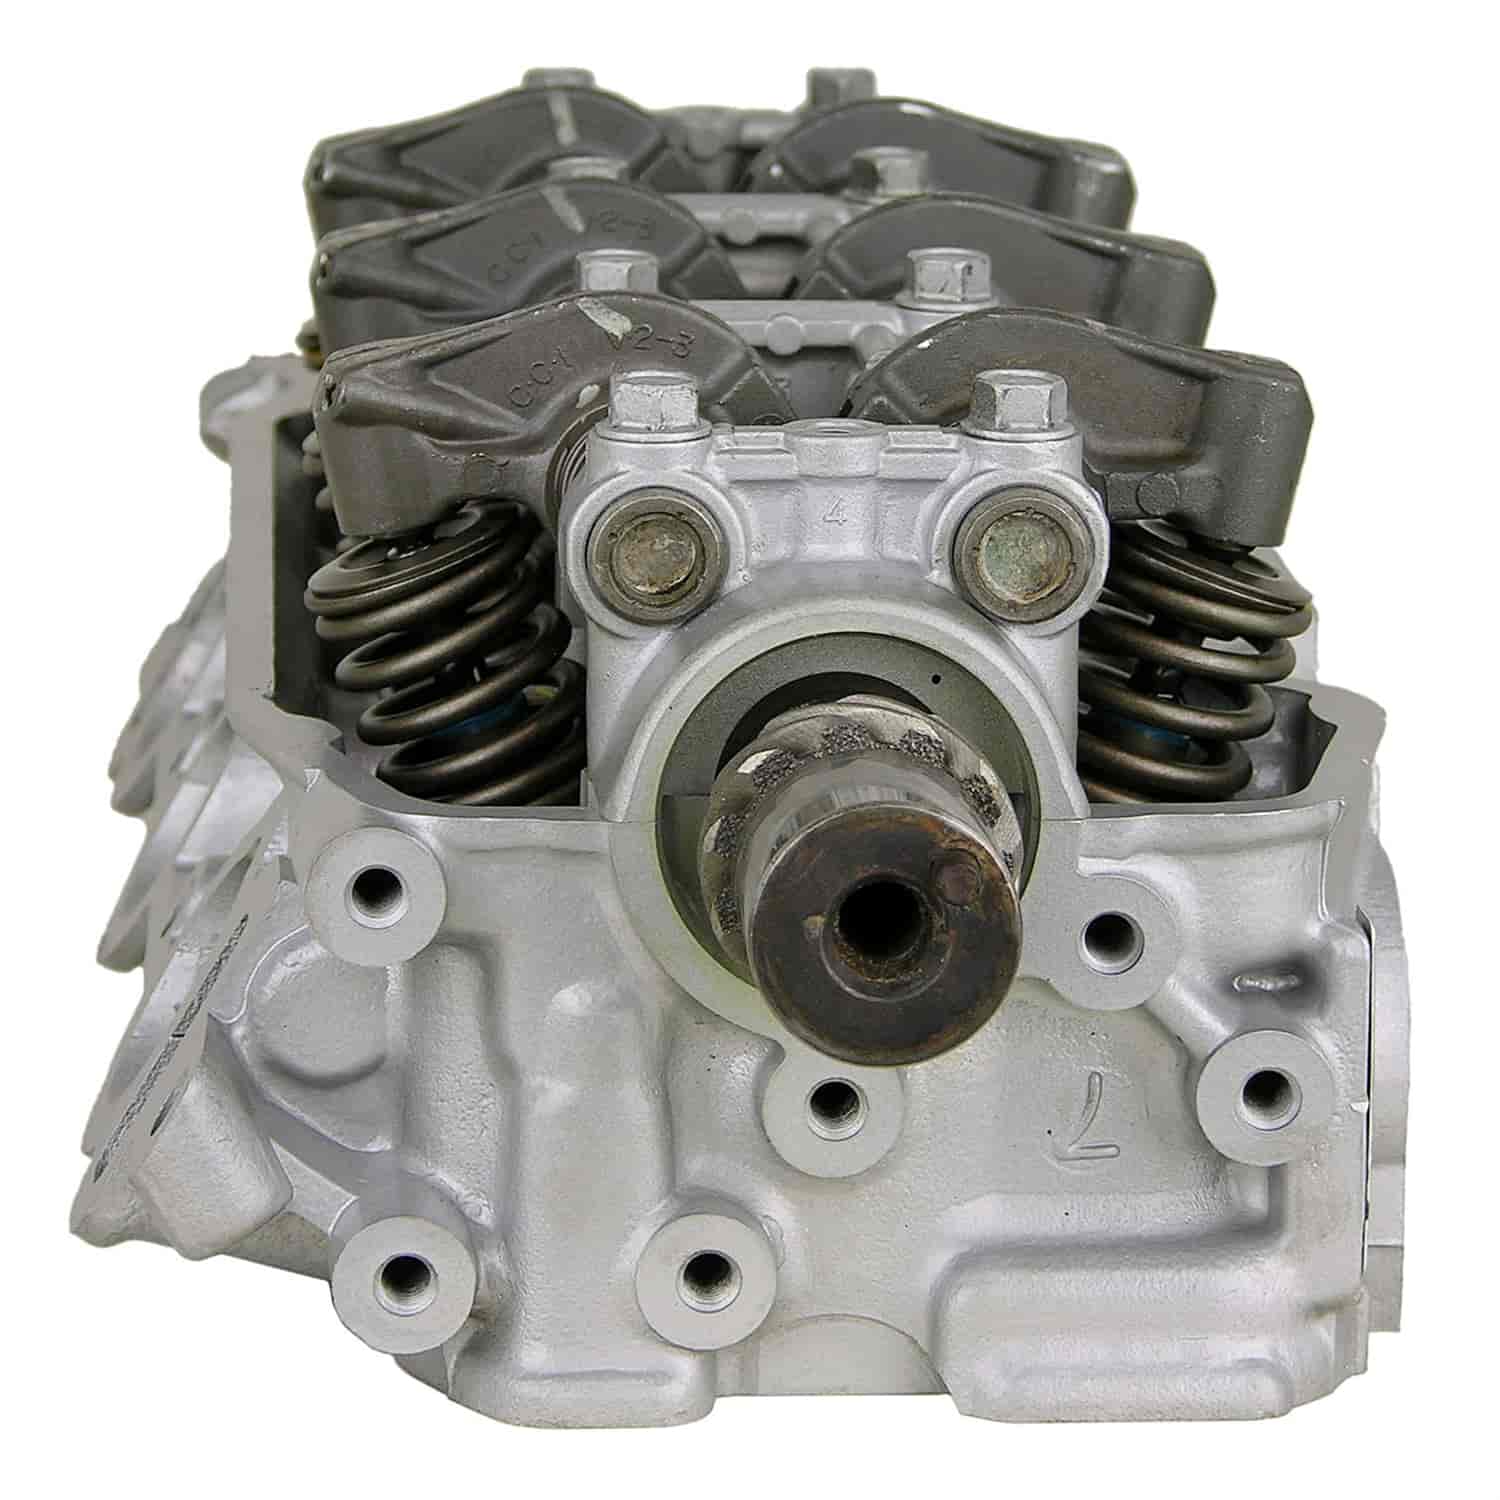 Remanufactured Cylinder Head for 1989-2000 Mitsubishi/Dodge/Chrysler/Hyundai/Plymouth with 3.0L V6 6G72